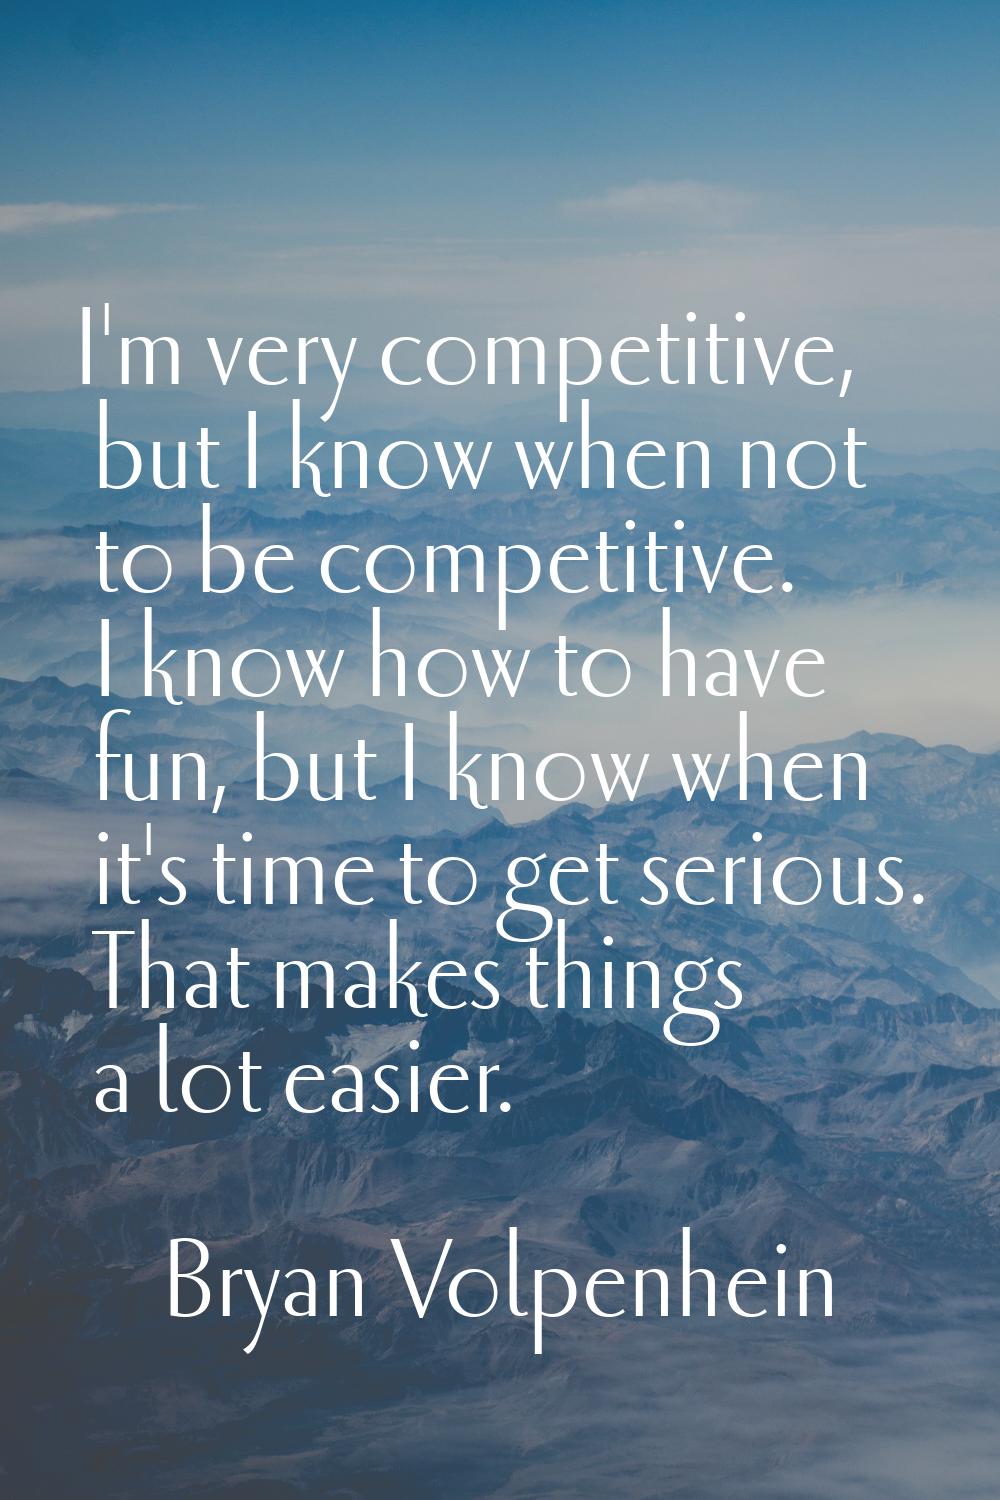 I'm very competitive, but I know when not to be competitive. I know how to have fun, but I know whe